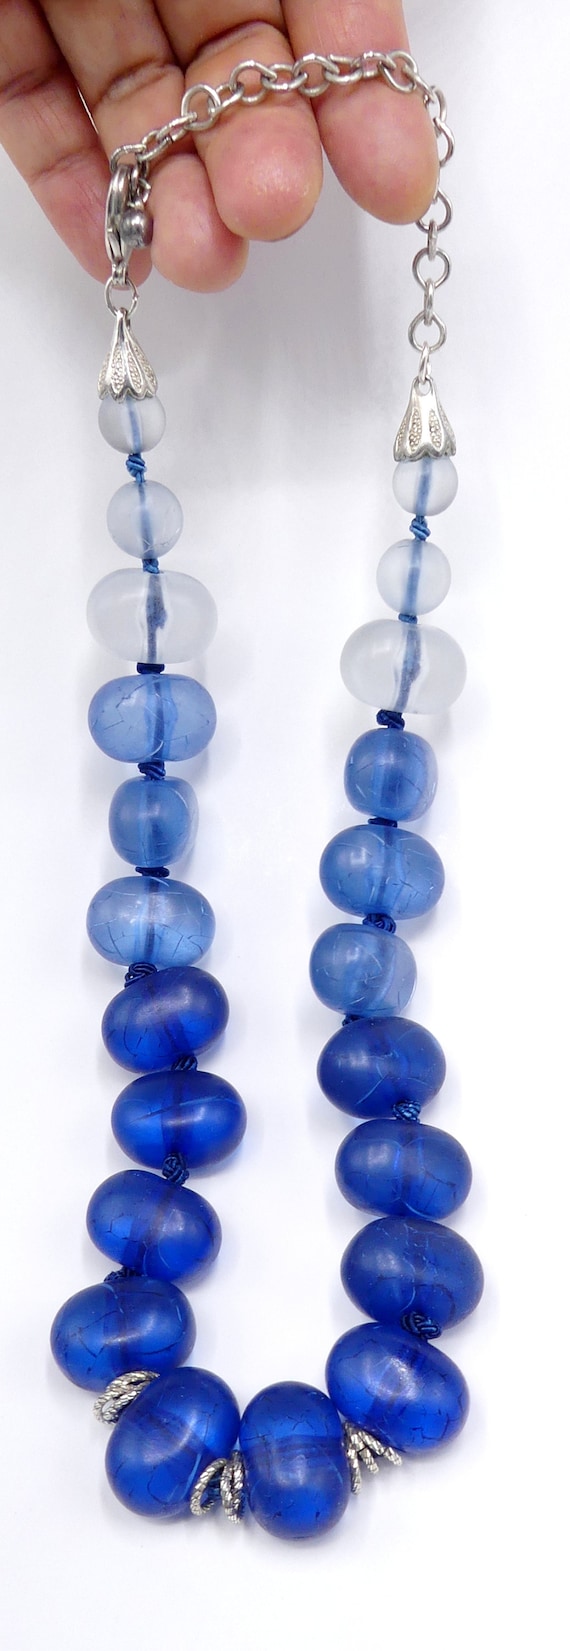 Vintage silver tone & blue Lucite beads necklace - image 1